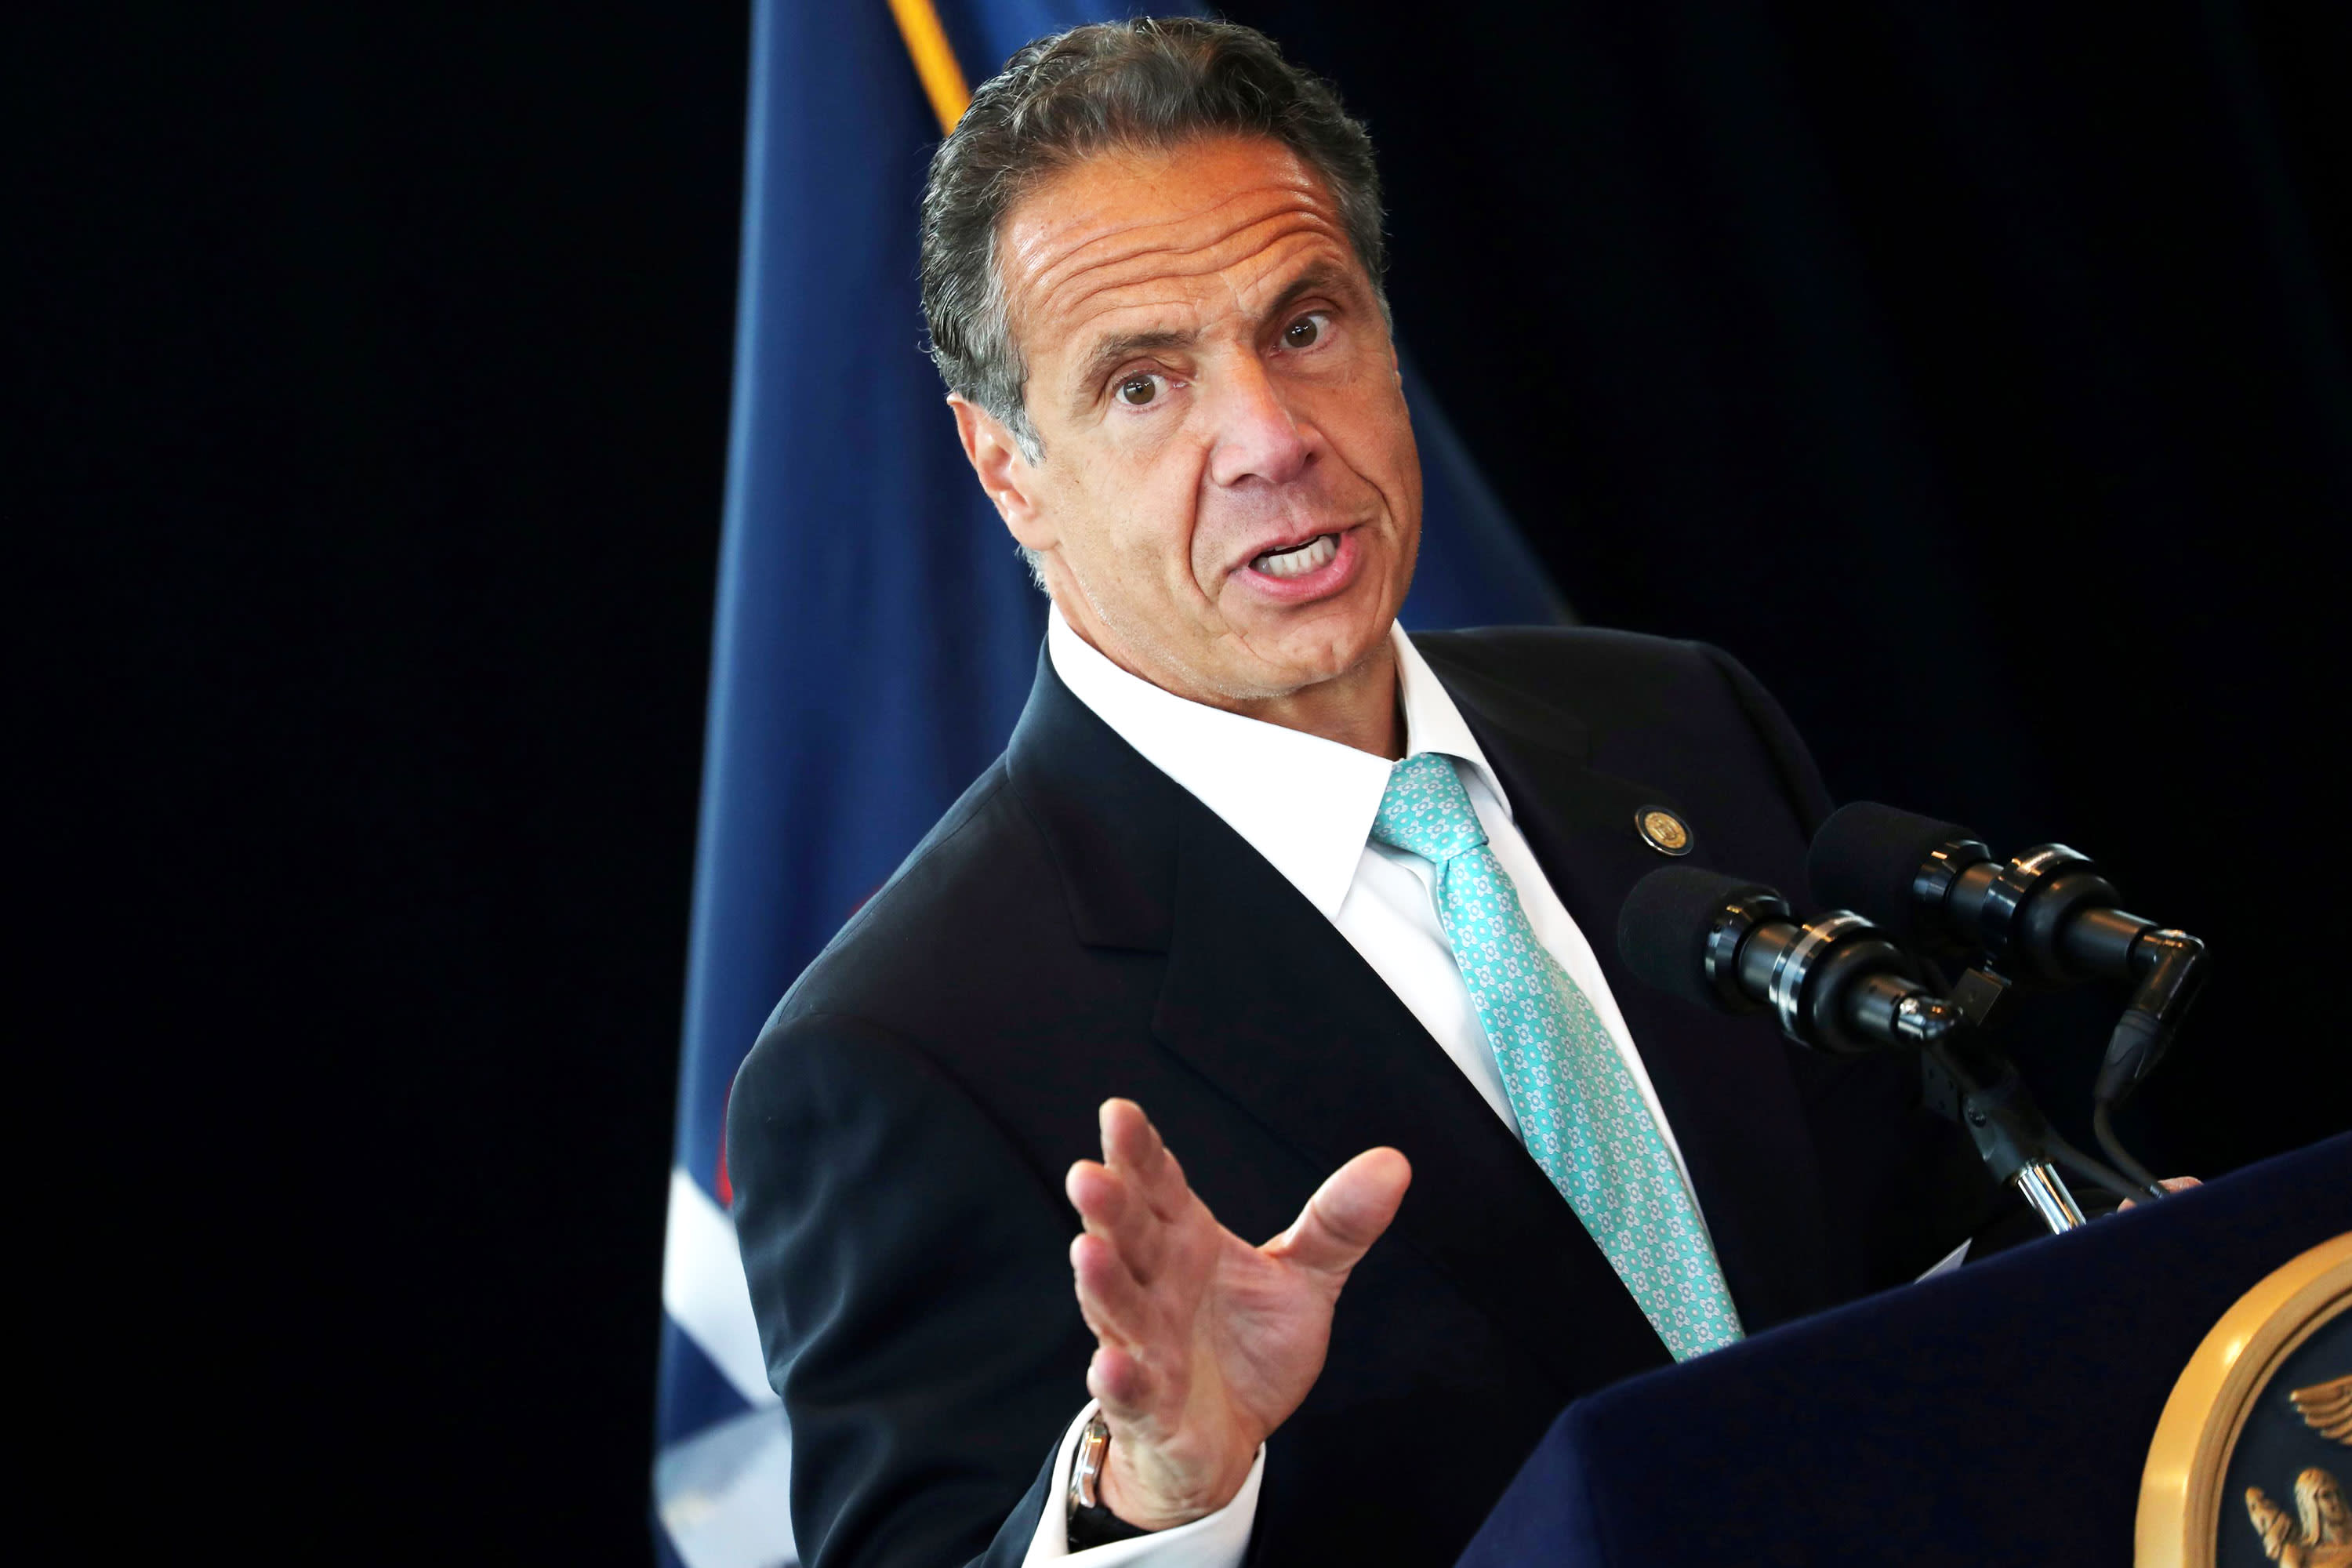 Criminal charge against former NY Gov. Andrew Cuomo is dropped – CNBC